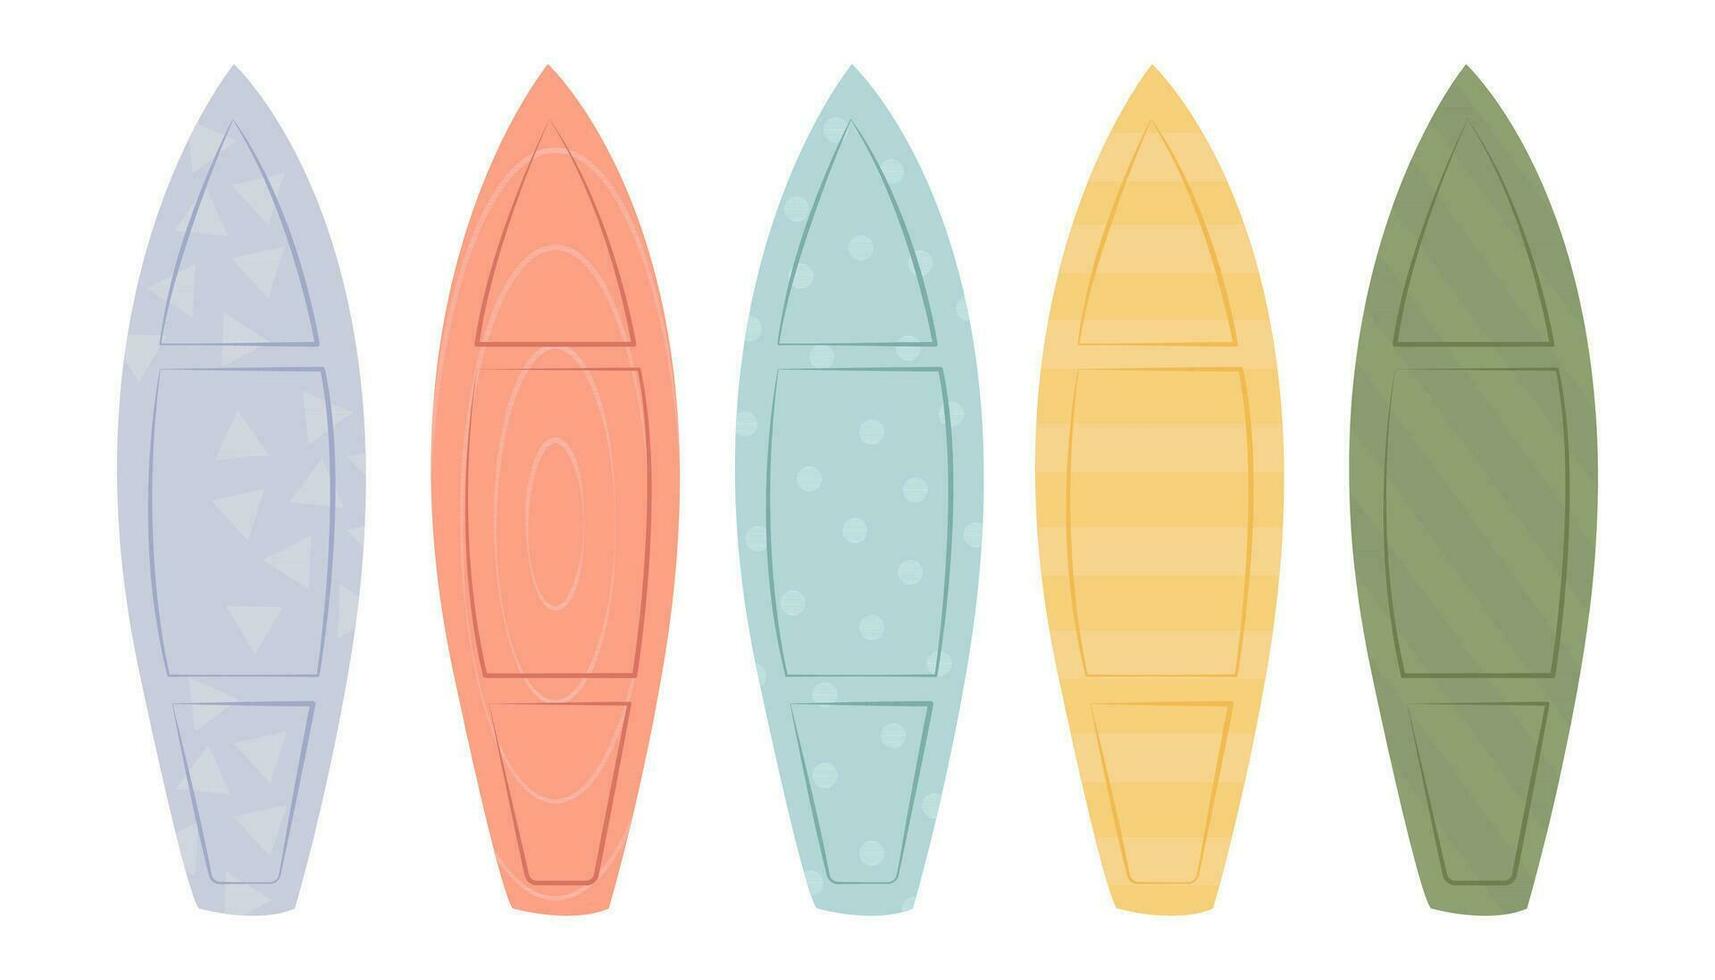 Set of Surfboards with Different Bright and Unusual Pattern Designs. Various Surf Desks, Surfing Boards Collection, Shortboard and Longboard Isolated on White Background. Cartoon Vector Illustration